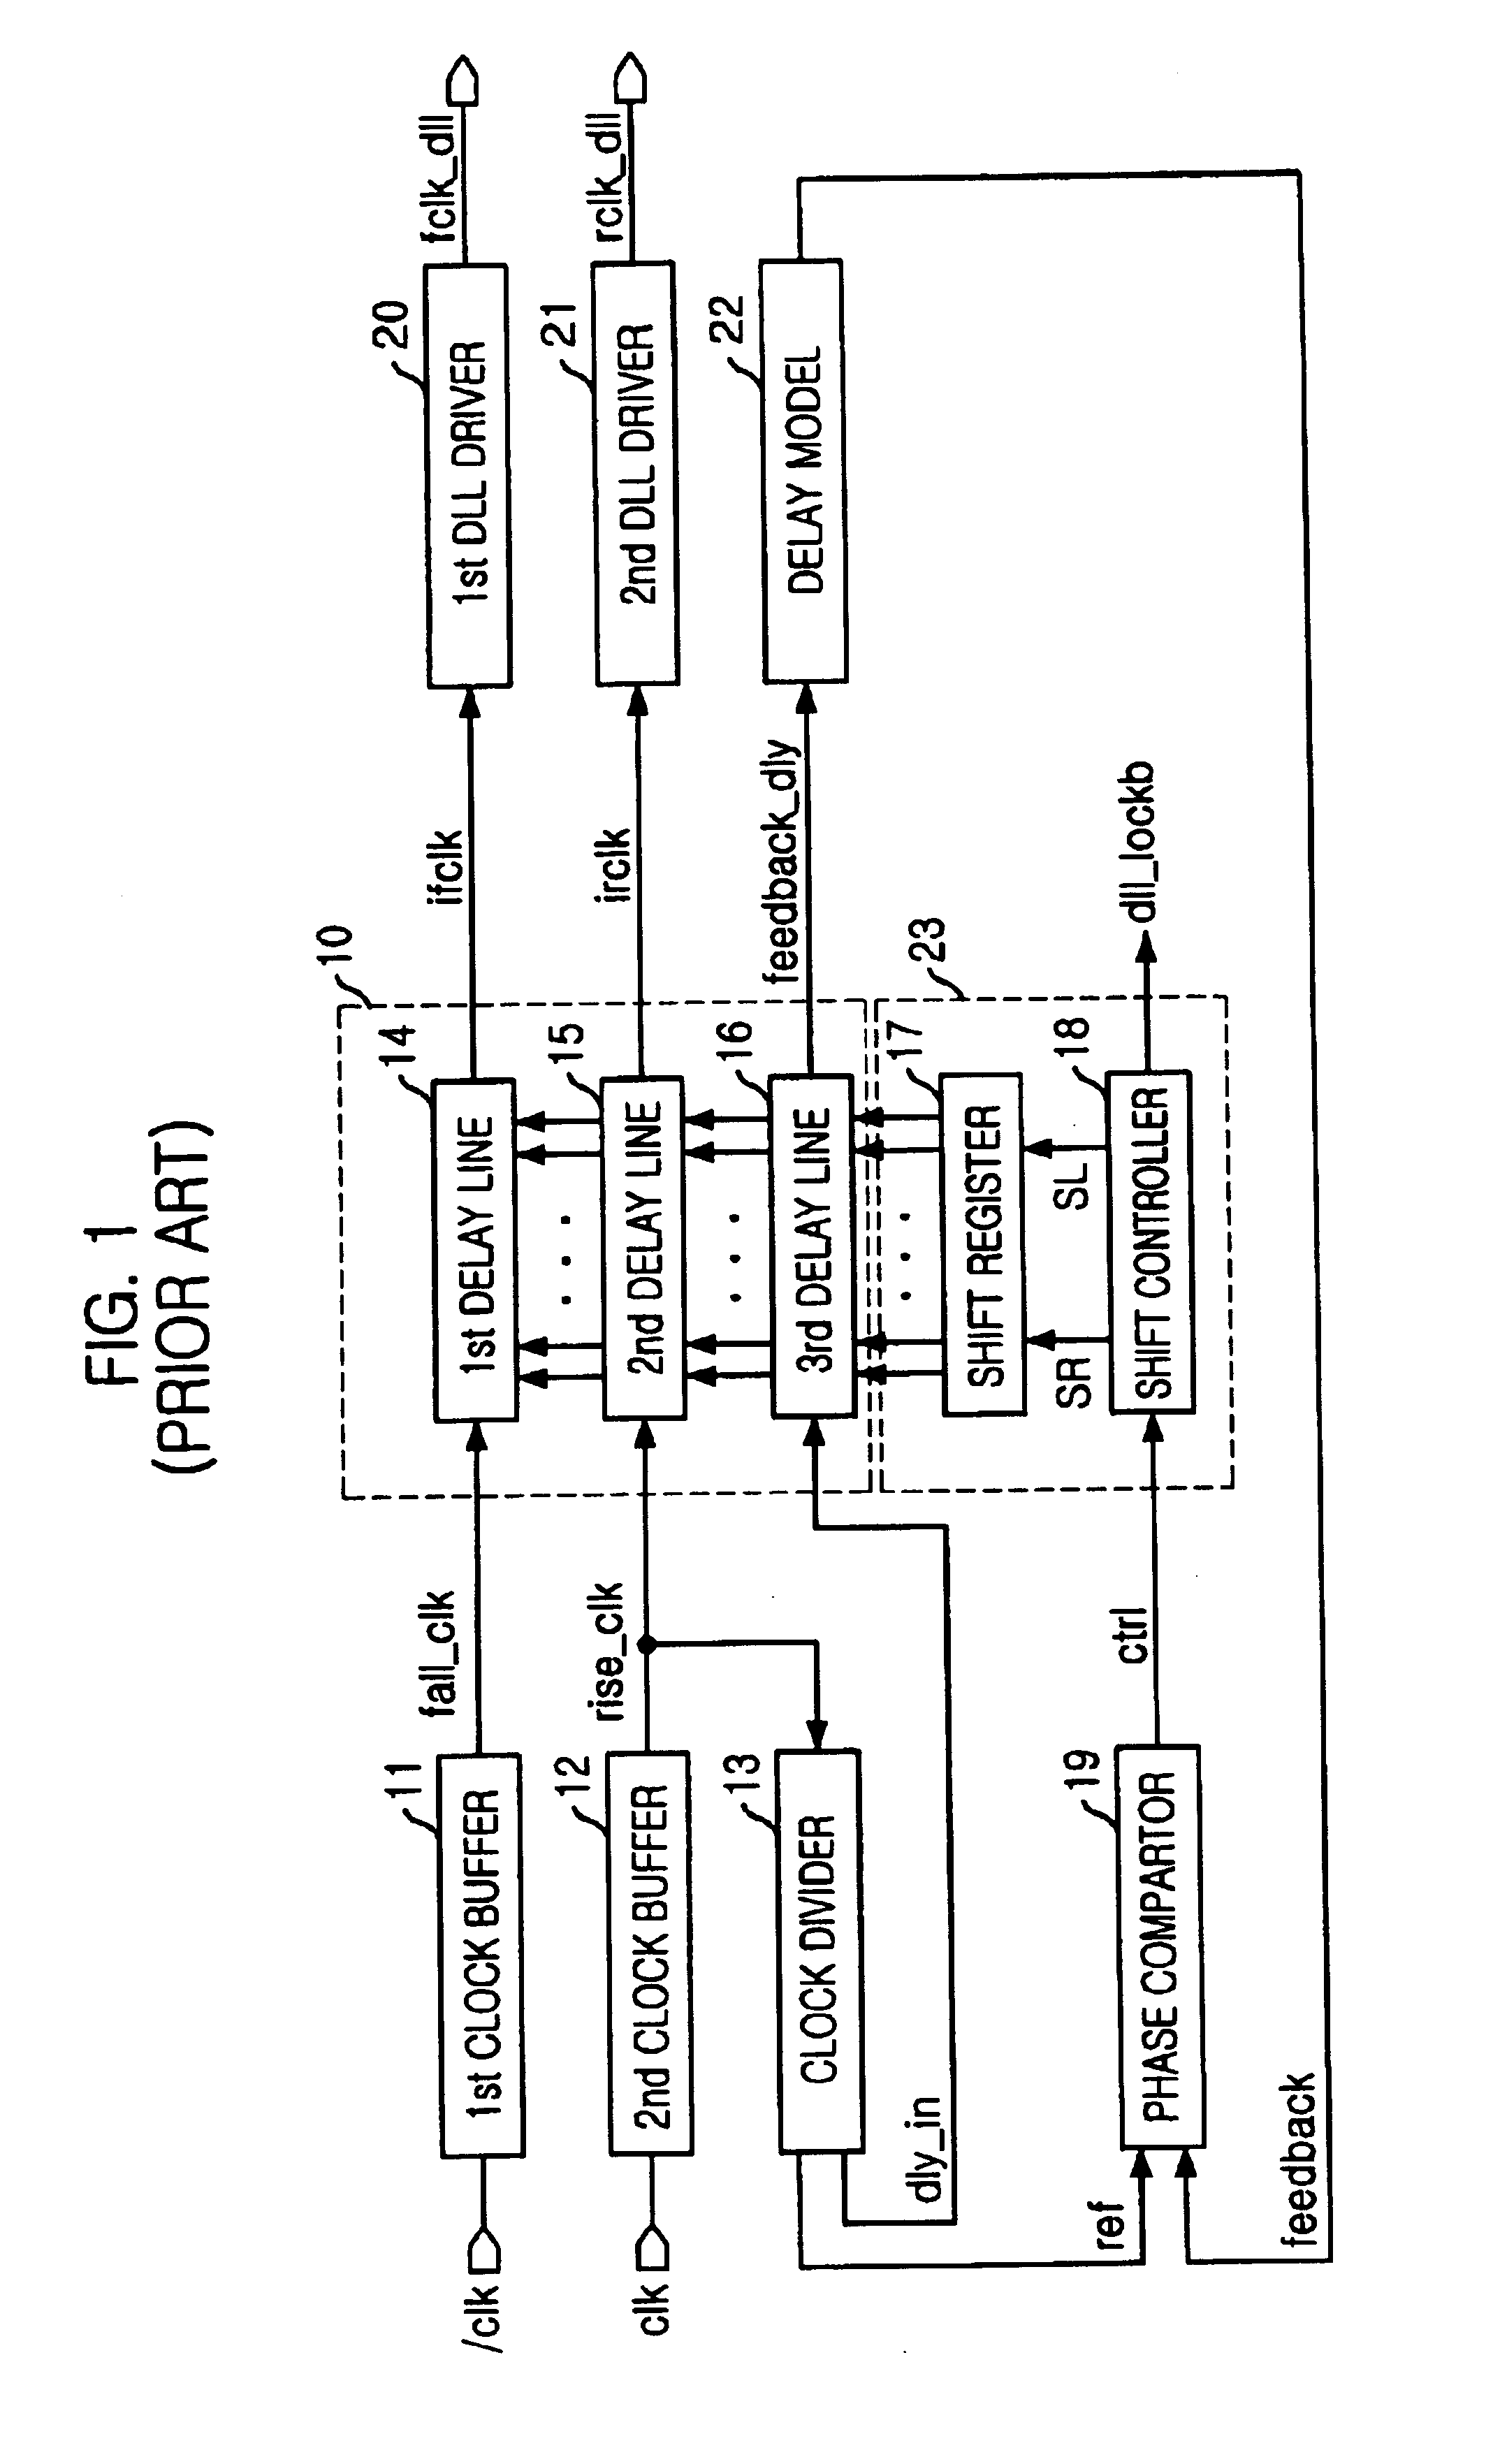 Ring-resister controlled DLL with fine delay line and direct skew sensing detector